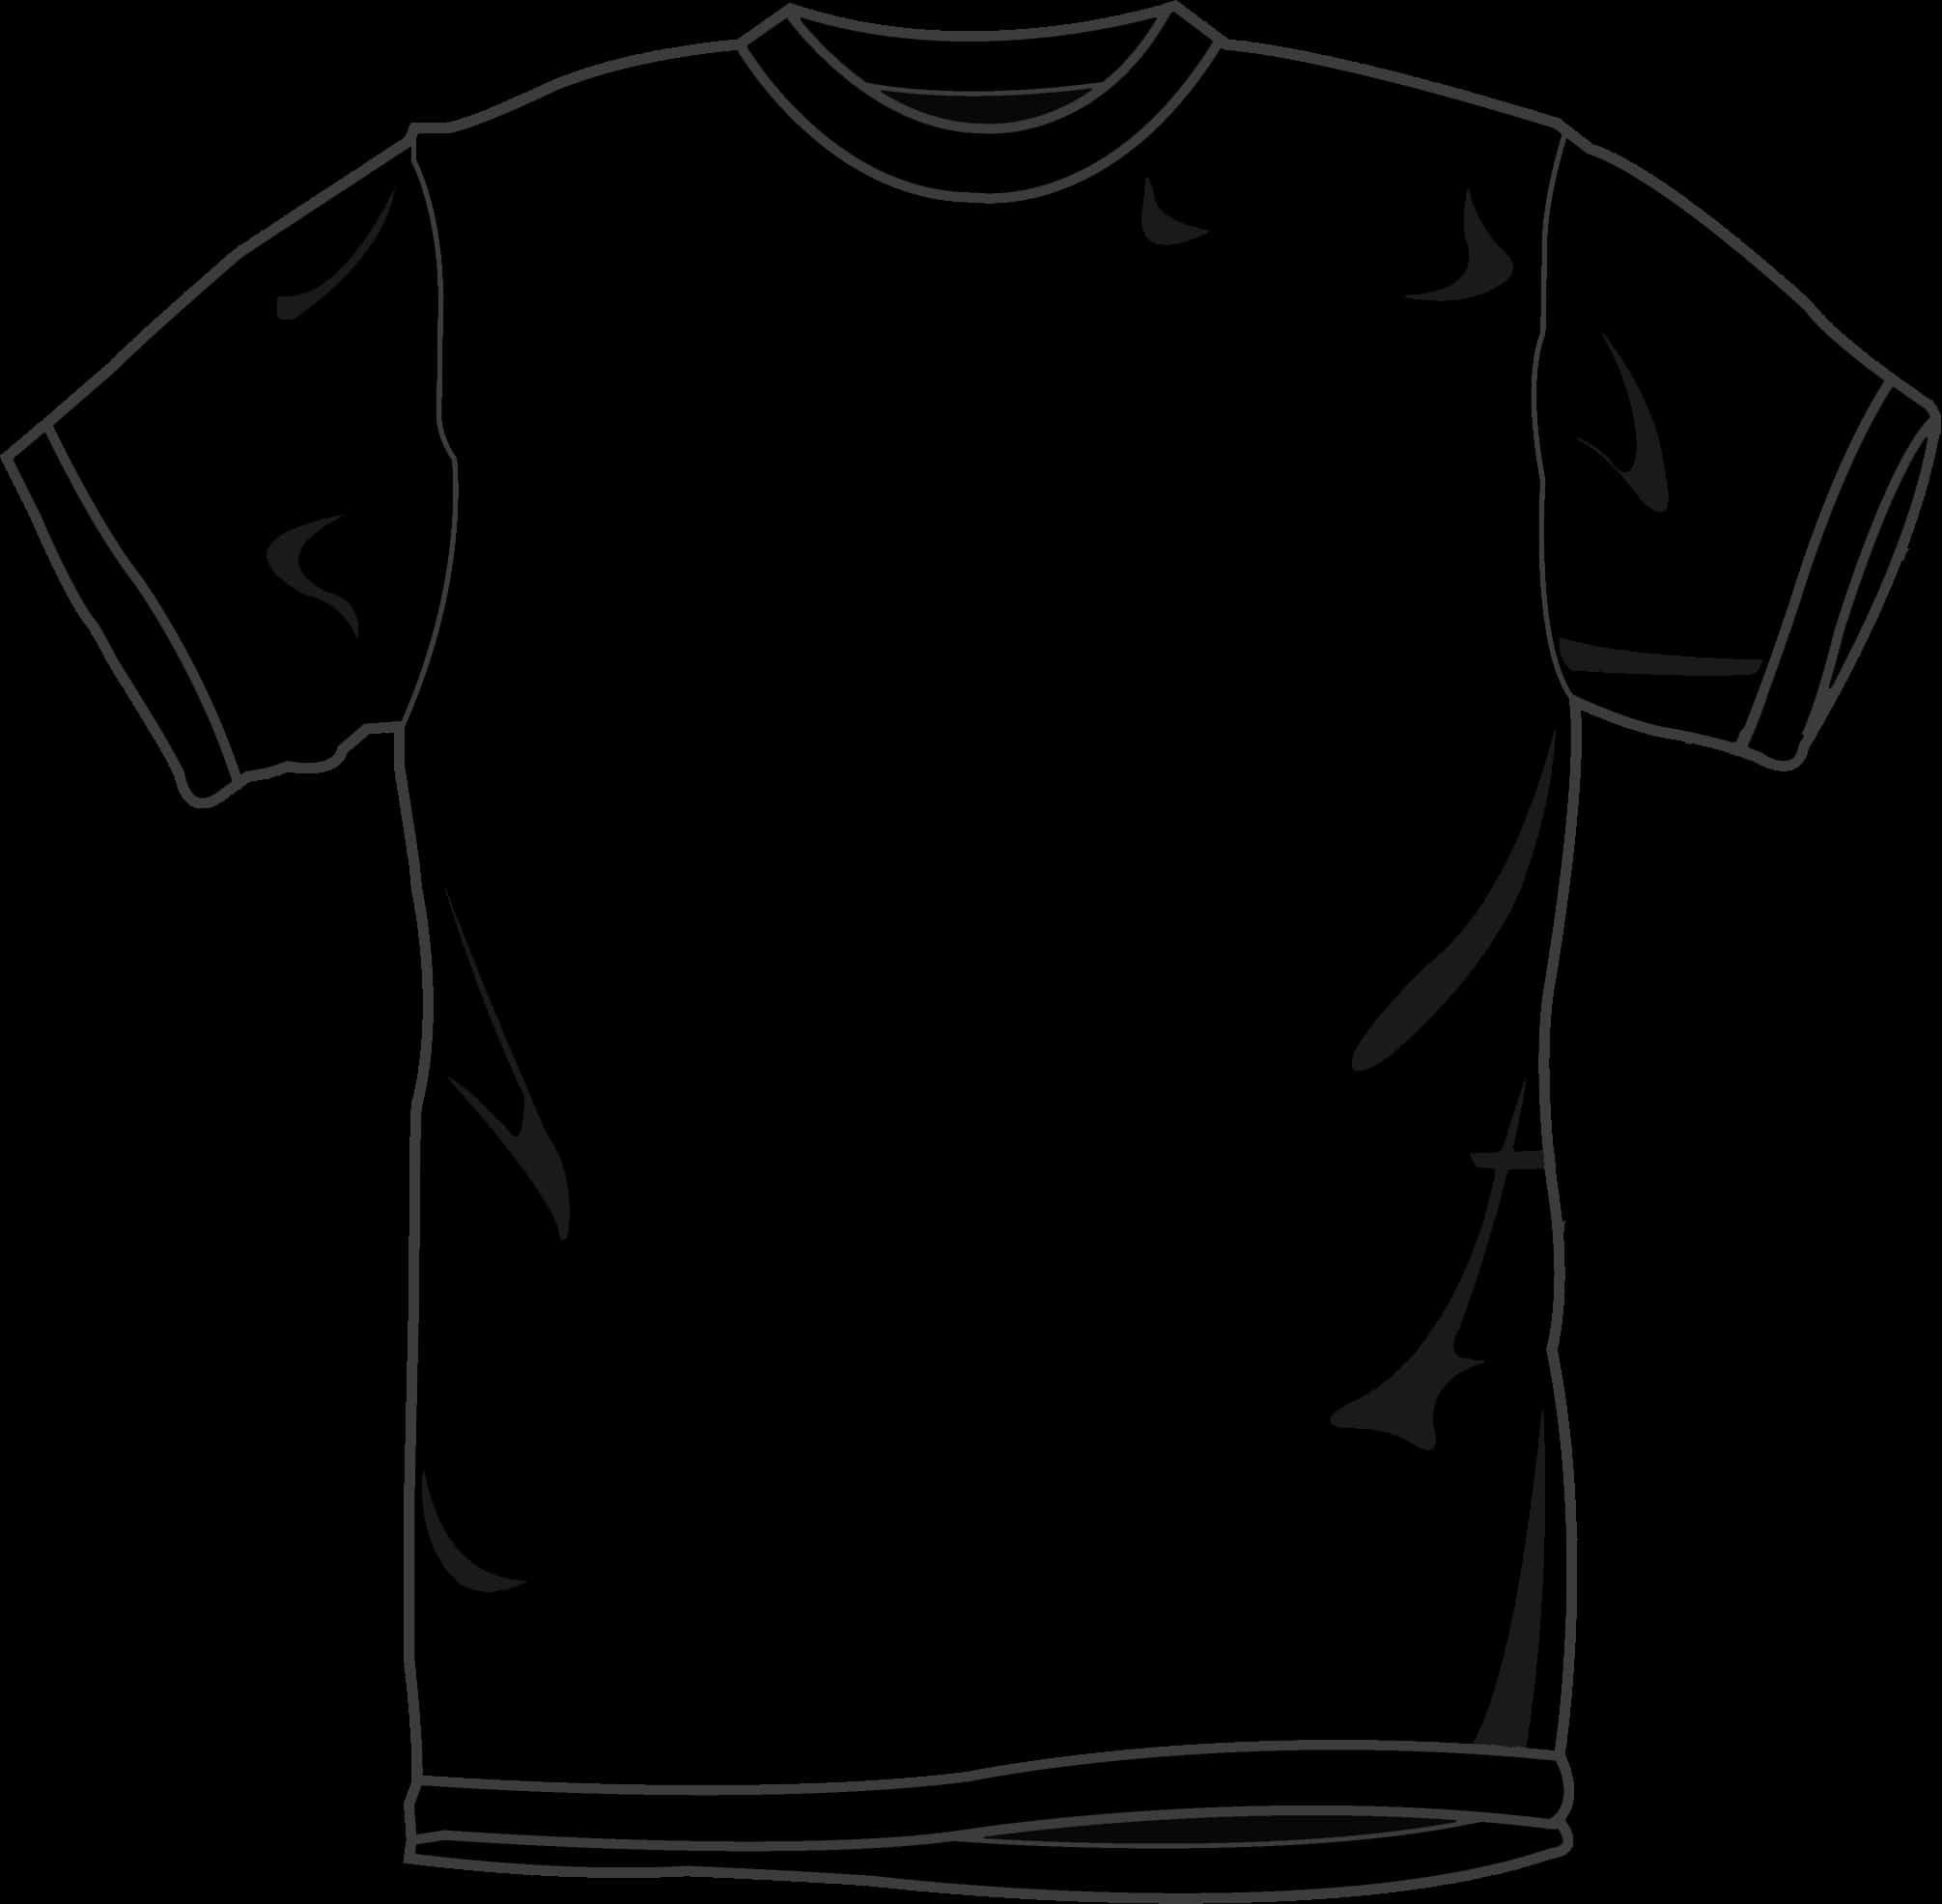 A Black T-shirt With White Lines